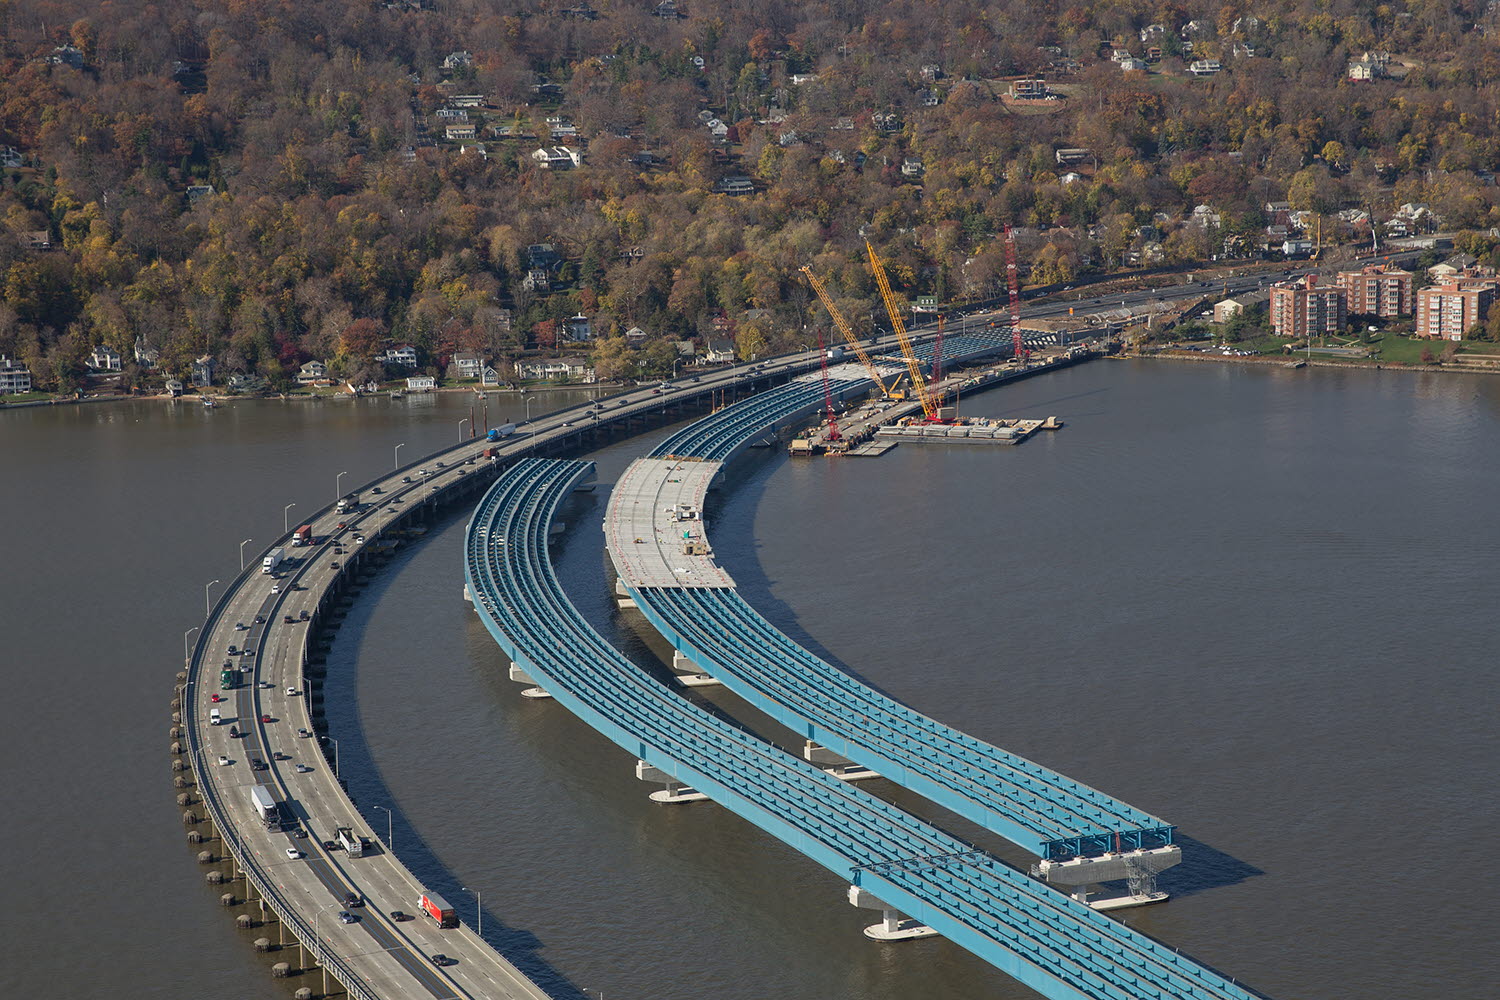 Aerial shot of the New NY Bridge under construction, clearly showing the trademark blue-color girders produced by High Steel Structures for the approach spans. The famous 